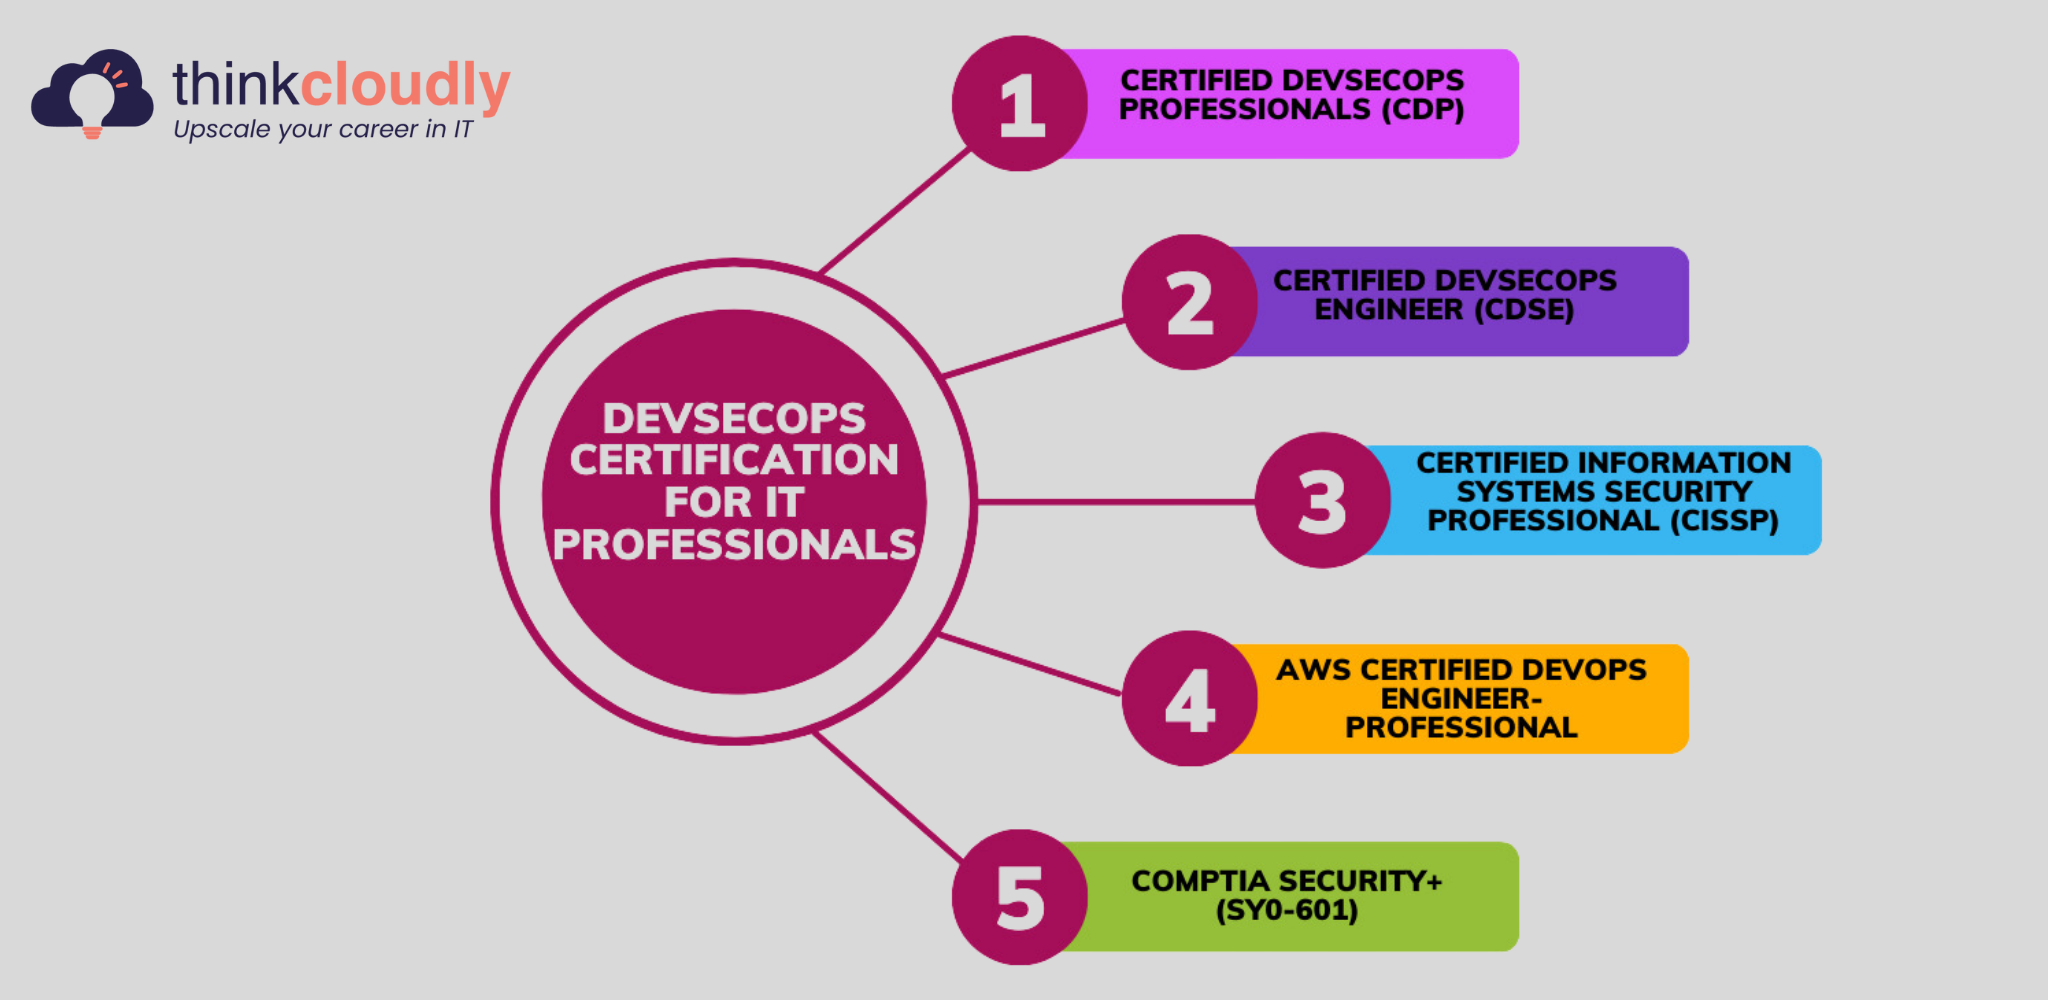 DevSecOps-training-and-certification-programs-Think-Cloudly